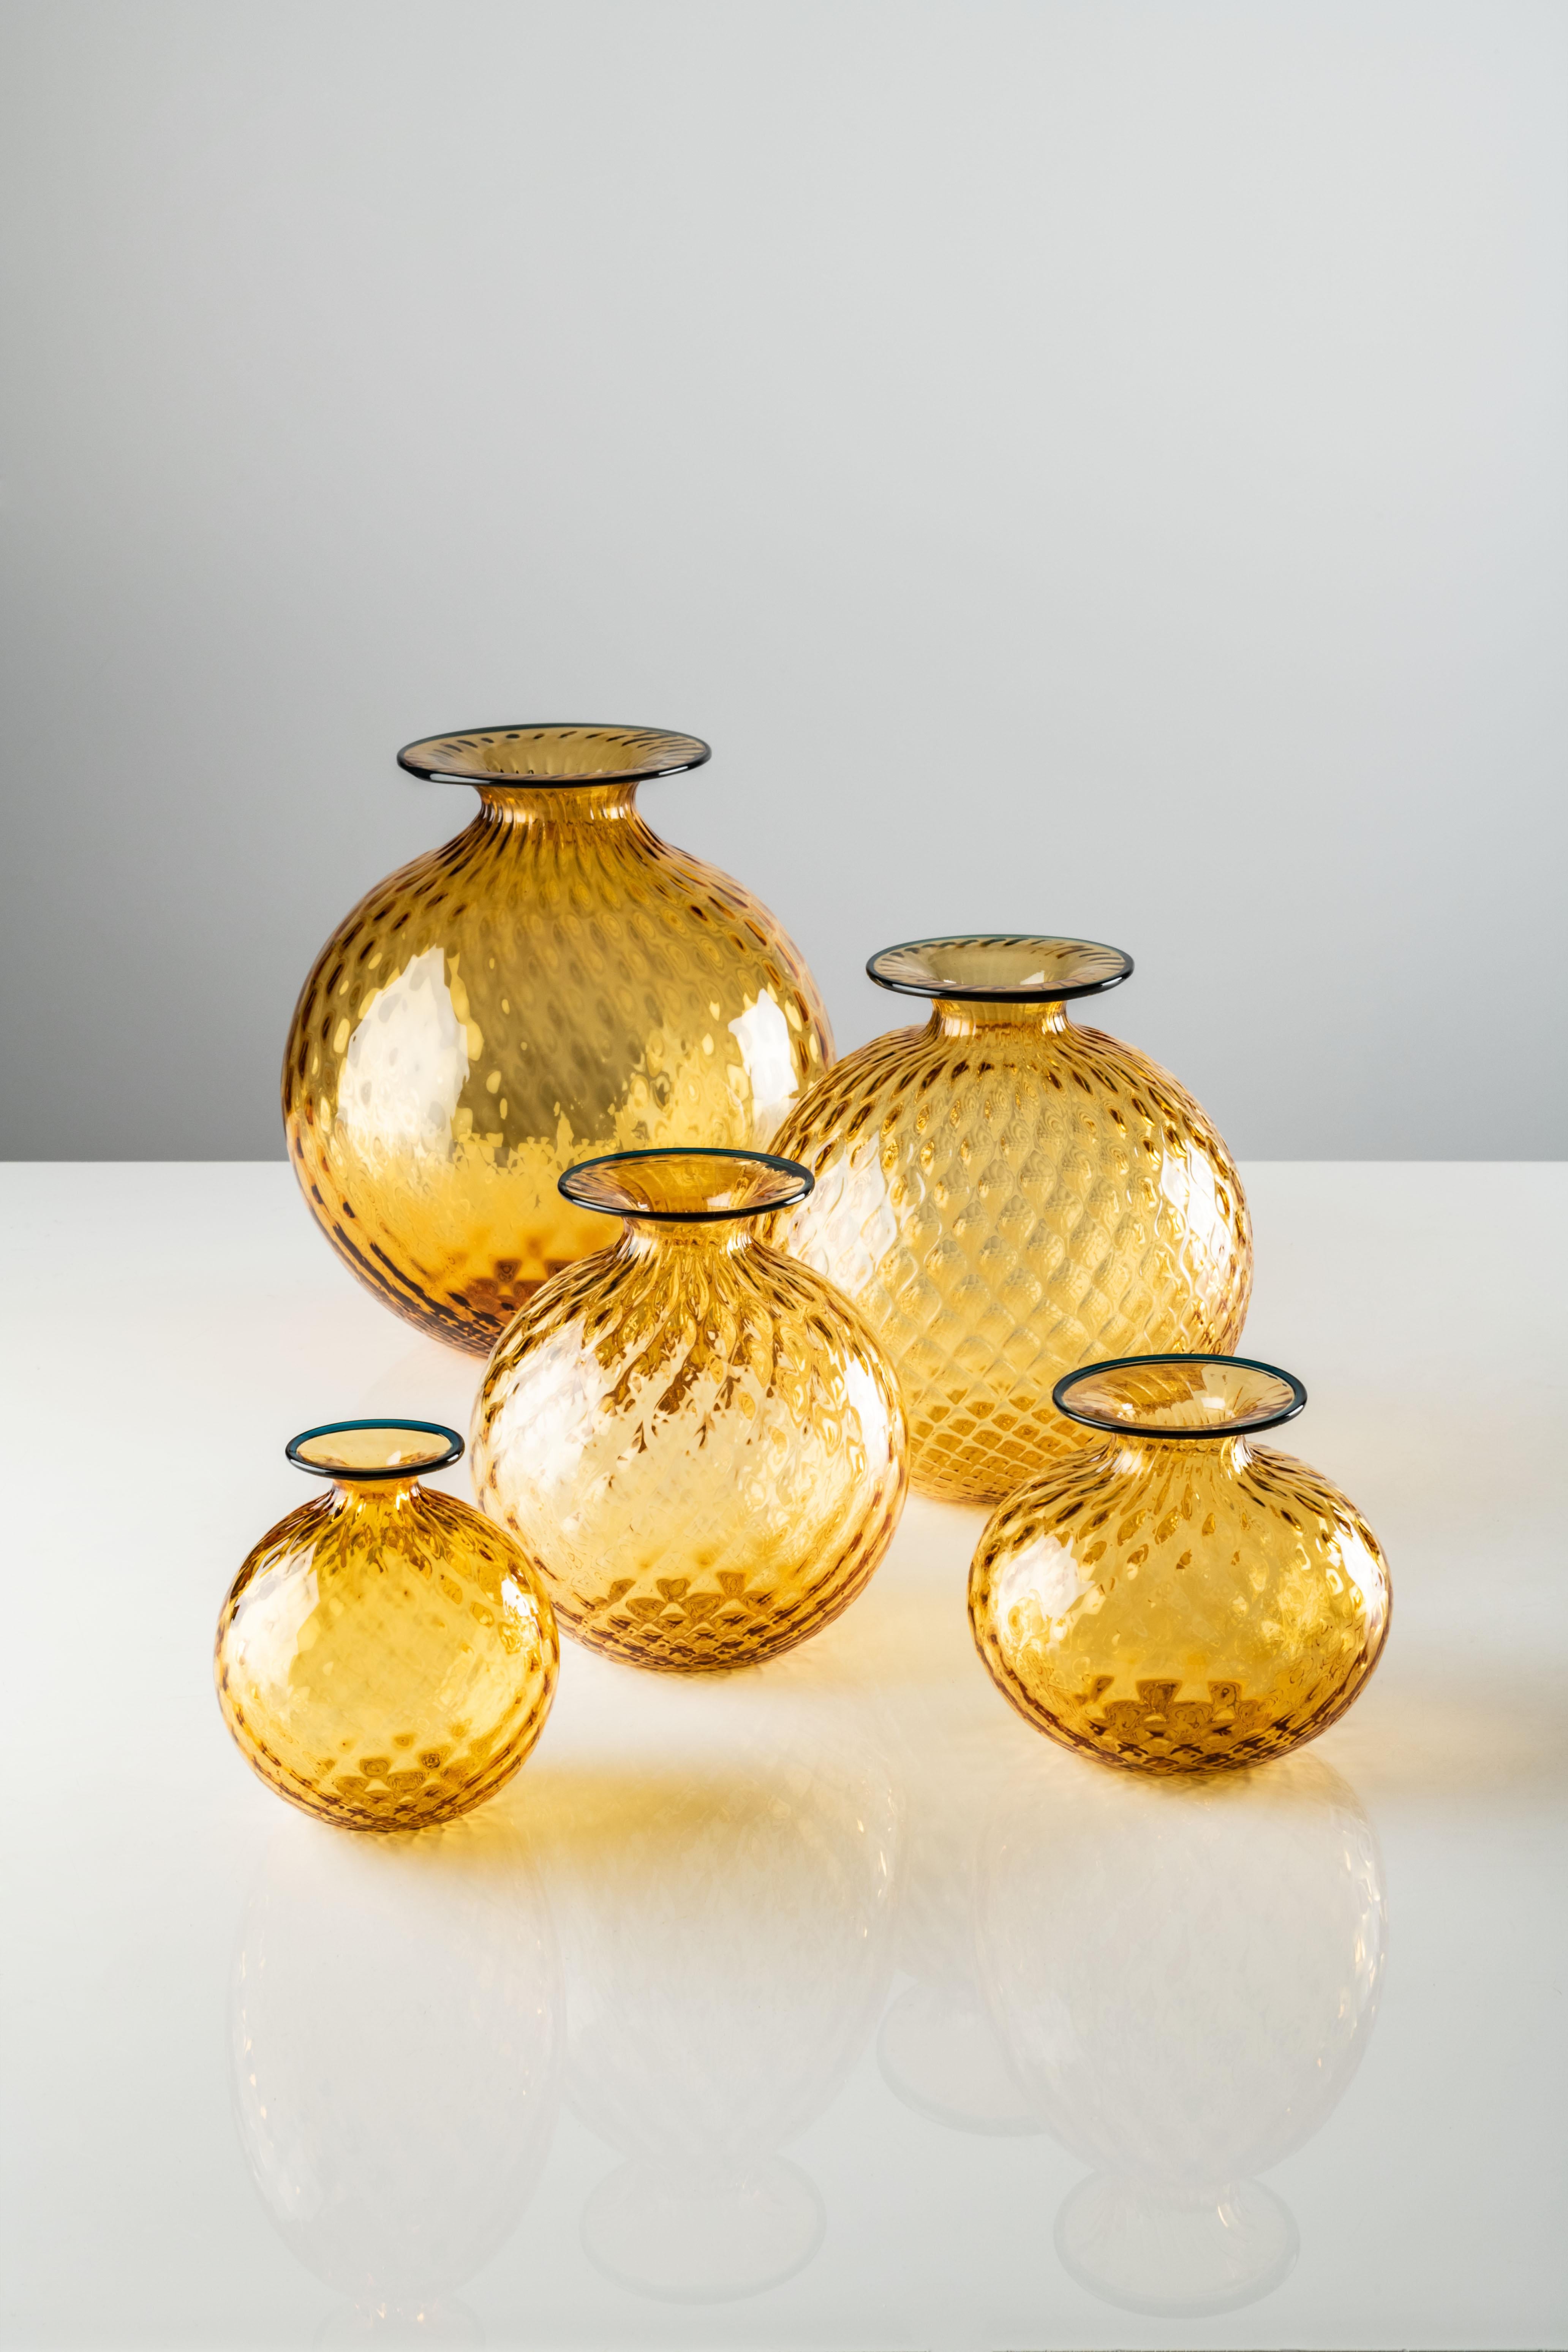 Monofiore Balloton small vase in amber Murano glass by Venini. Monofiori breaks with tradition in 1970 and then does it again in 2016. But its essence remains the same: it looks soft, but it’s not; it’s glass. The optical illusion of Monofiori by